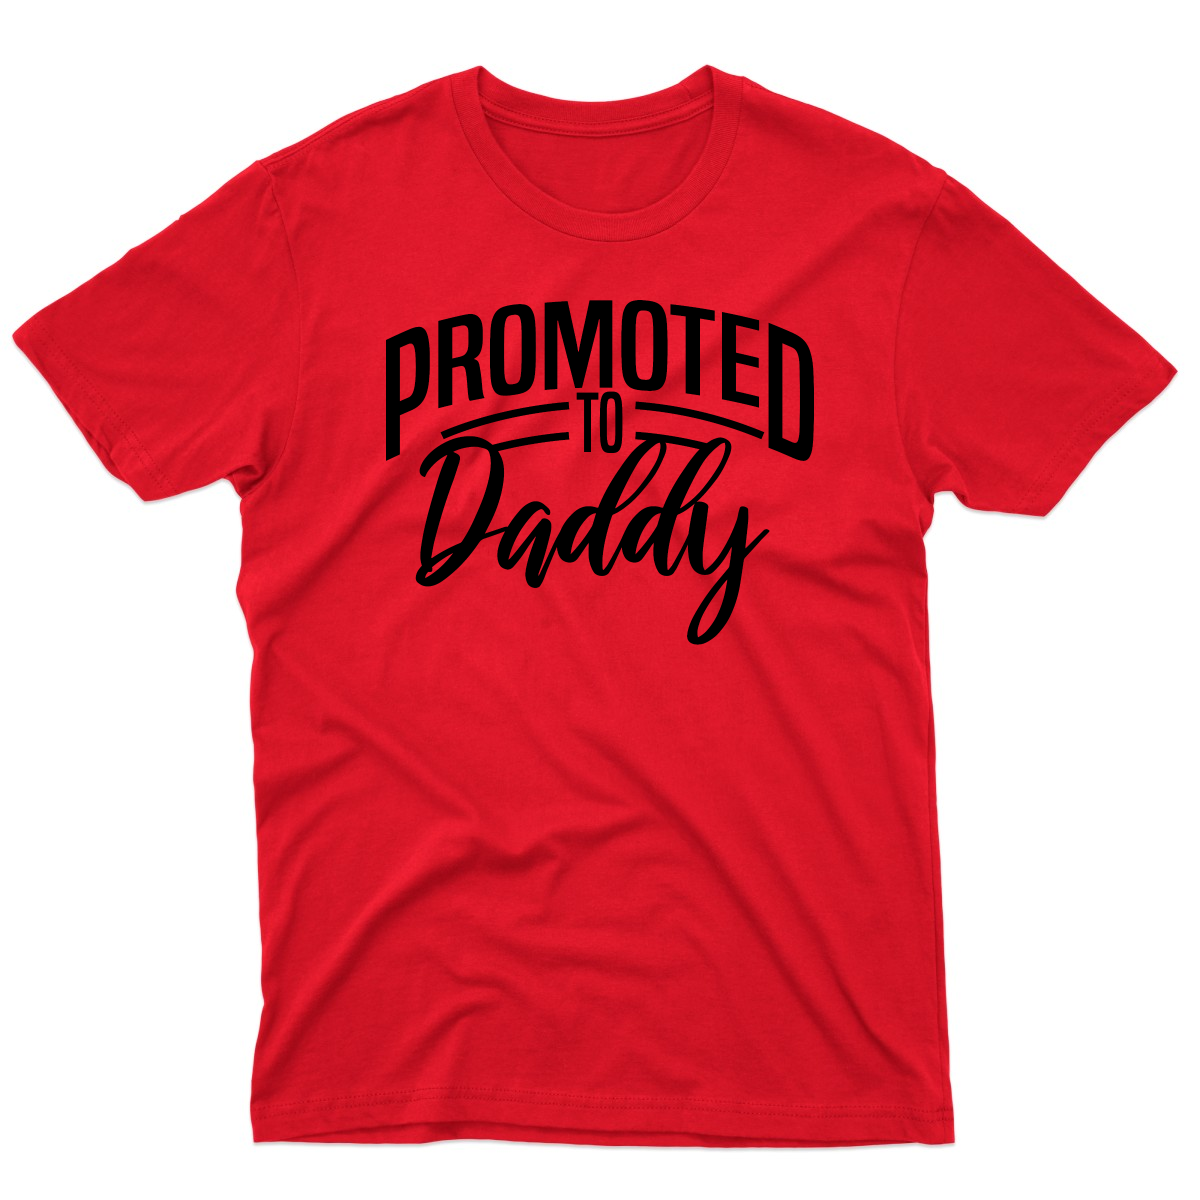 Promoted to daddy Men's T-shirt | Red